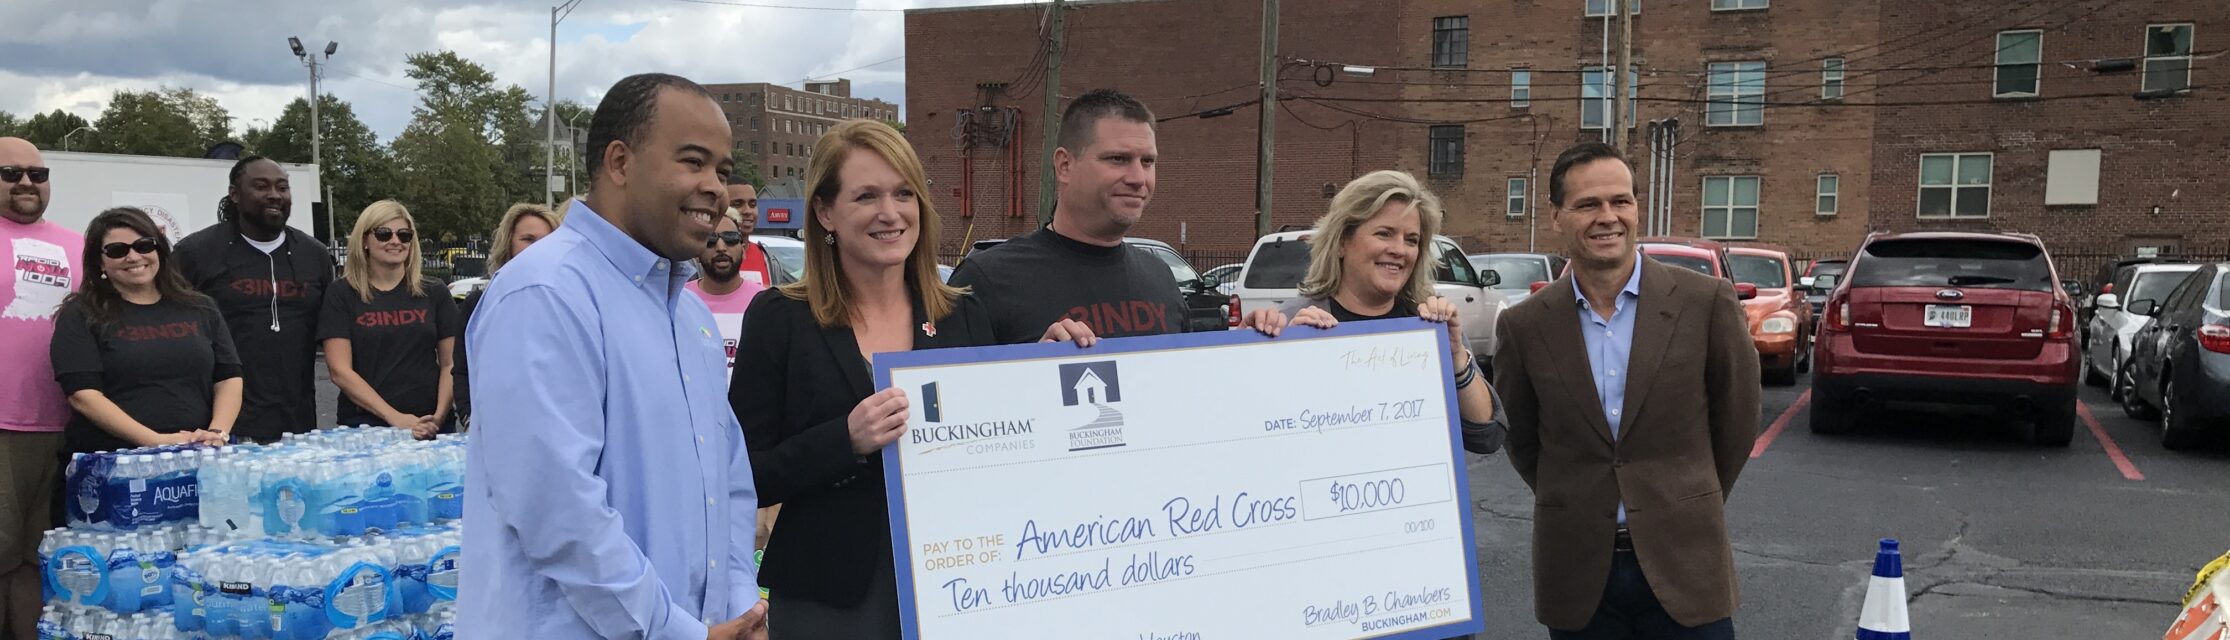 Buckingham Foundation staff holding a check for $10,000 to American Red Cross